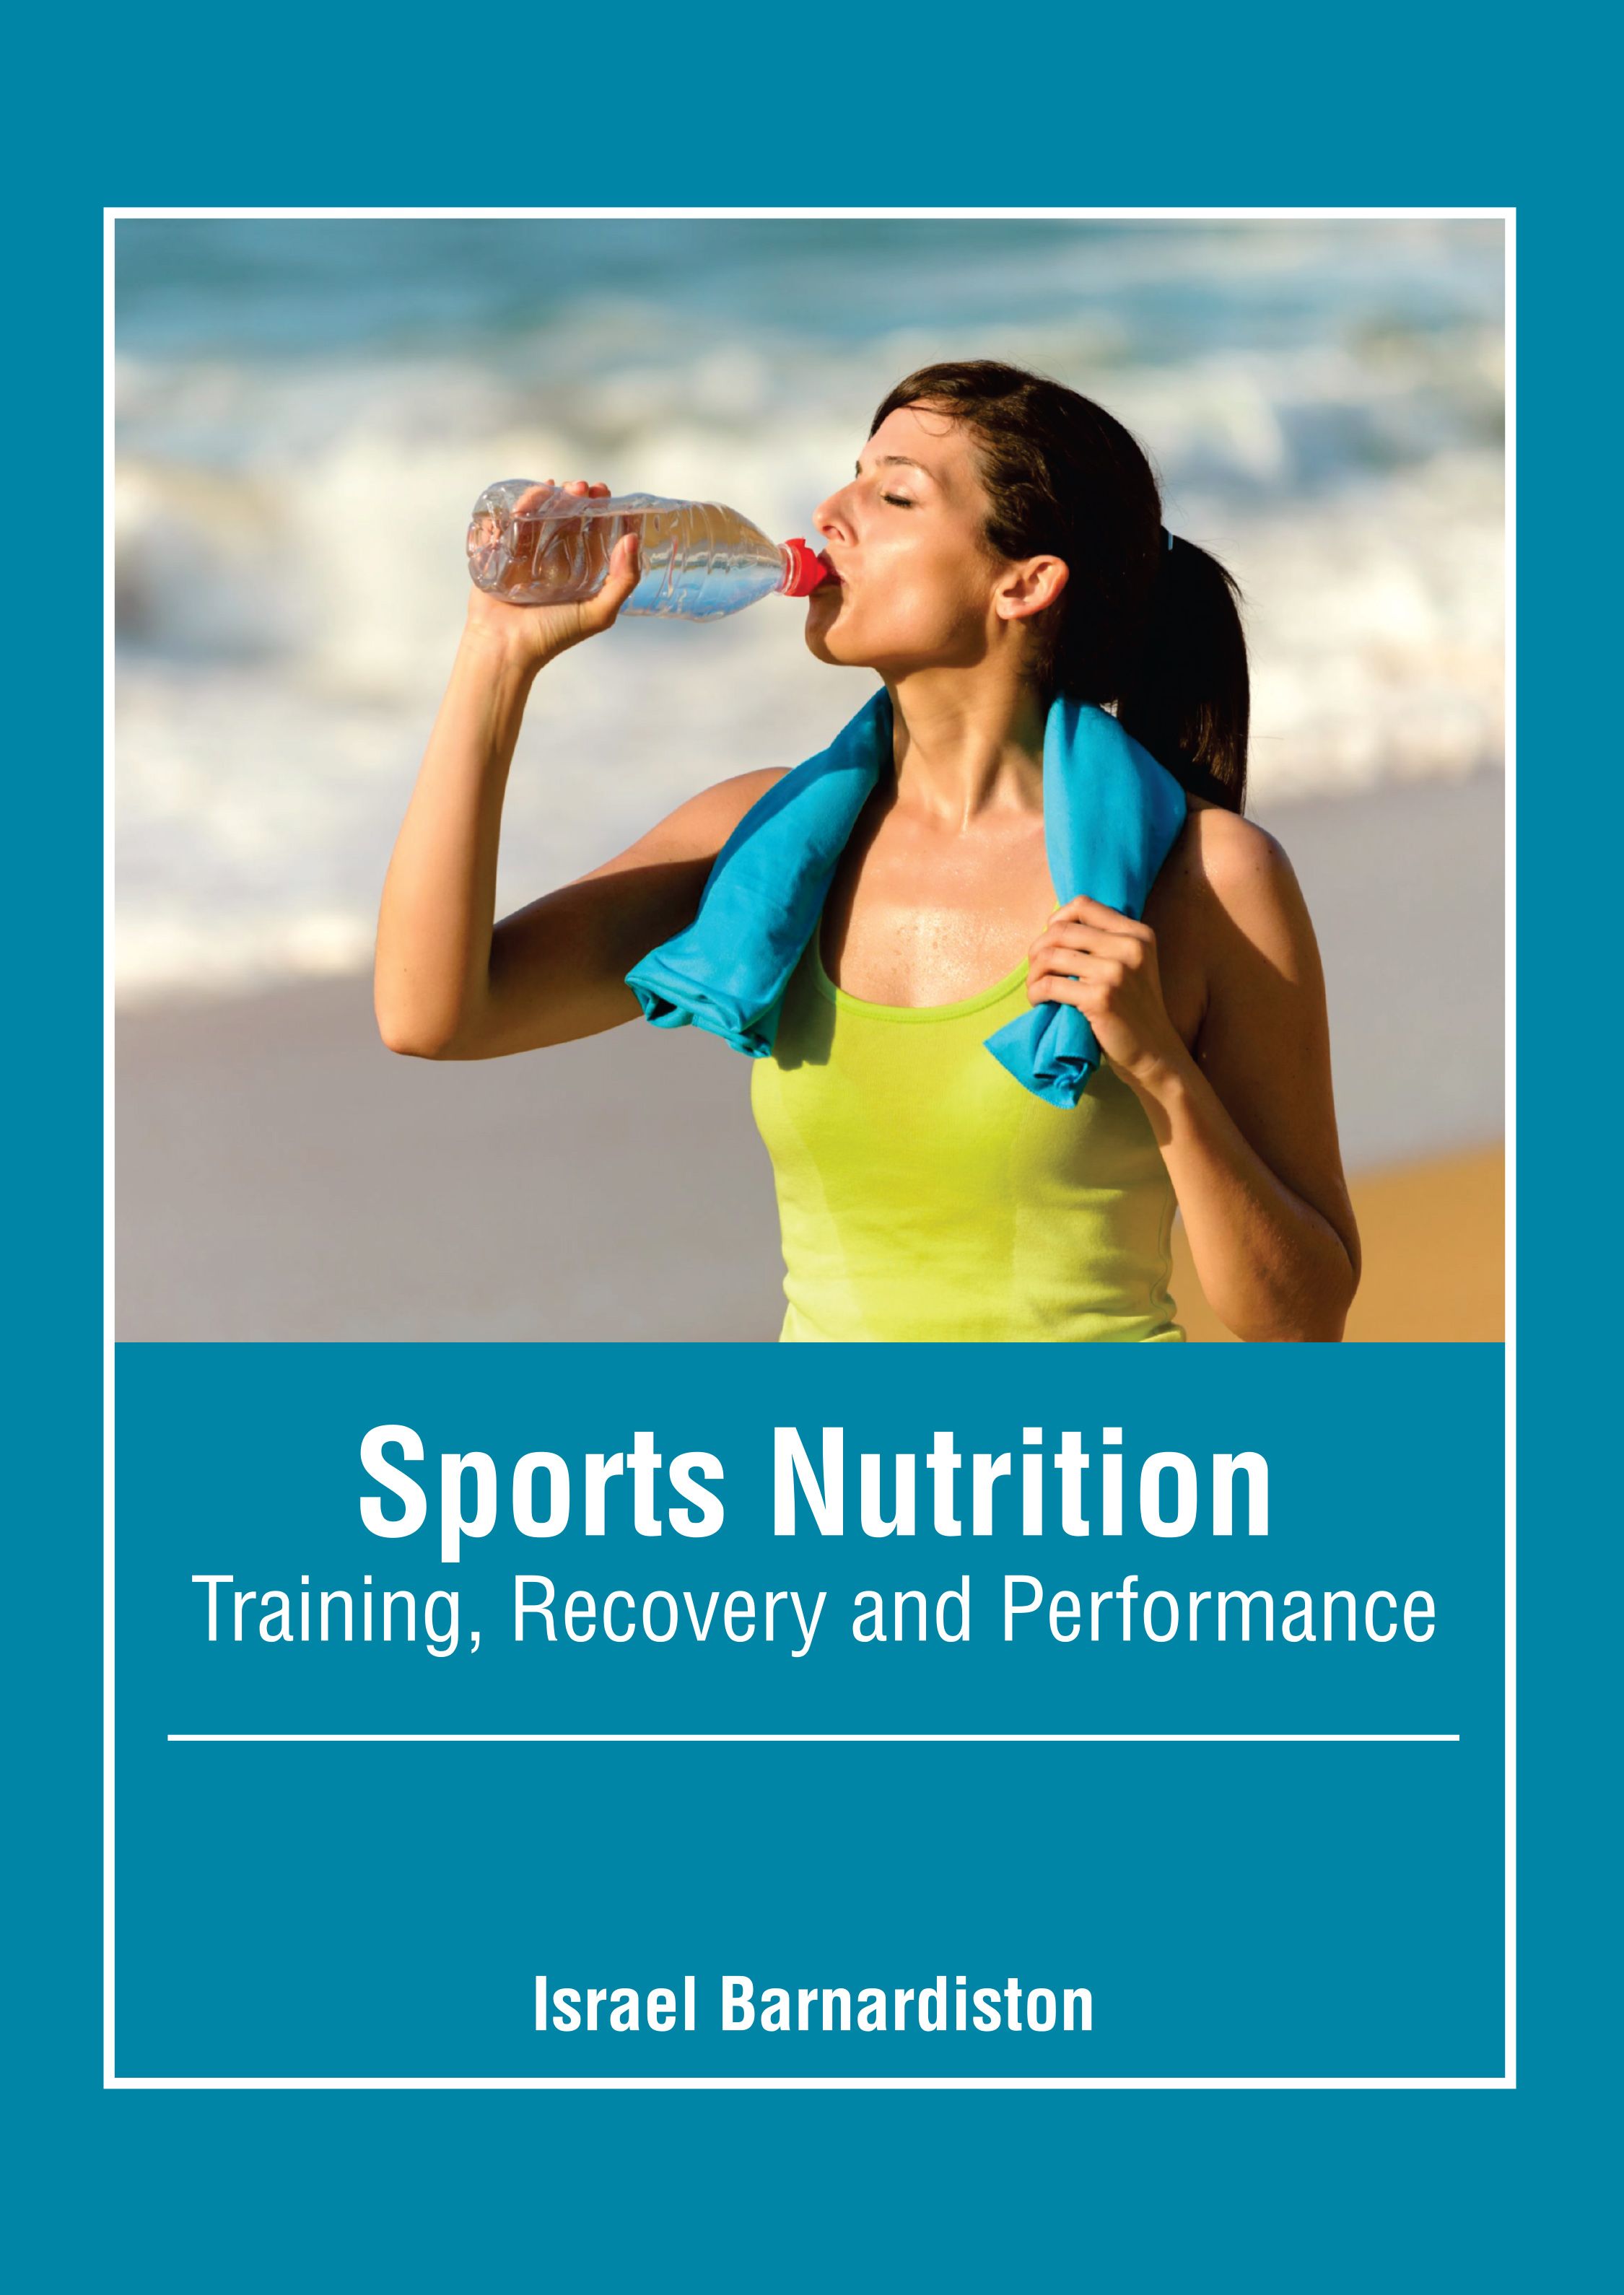 SPORTS NUTRITION: TRAINING, RECOVERY AND PERFORMANCE